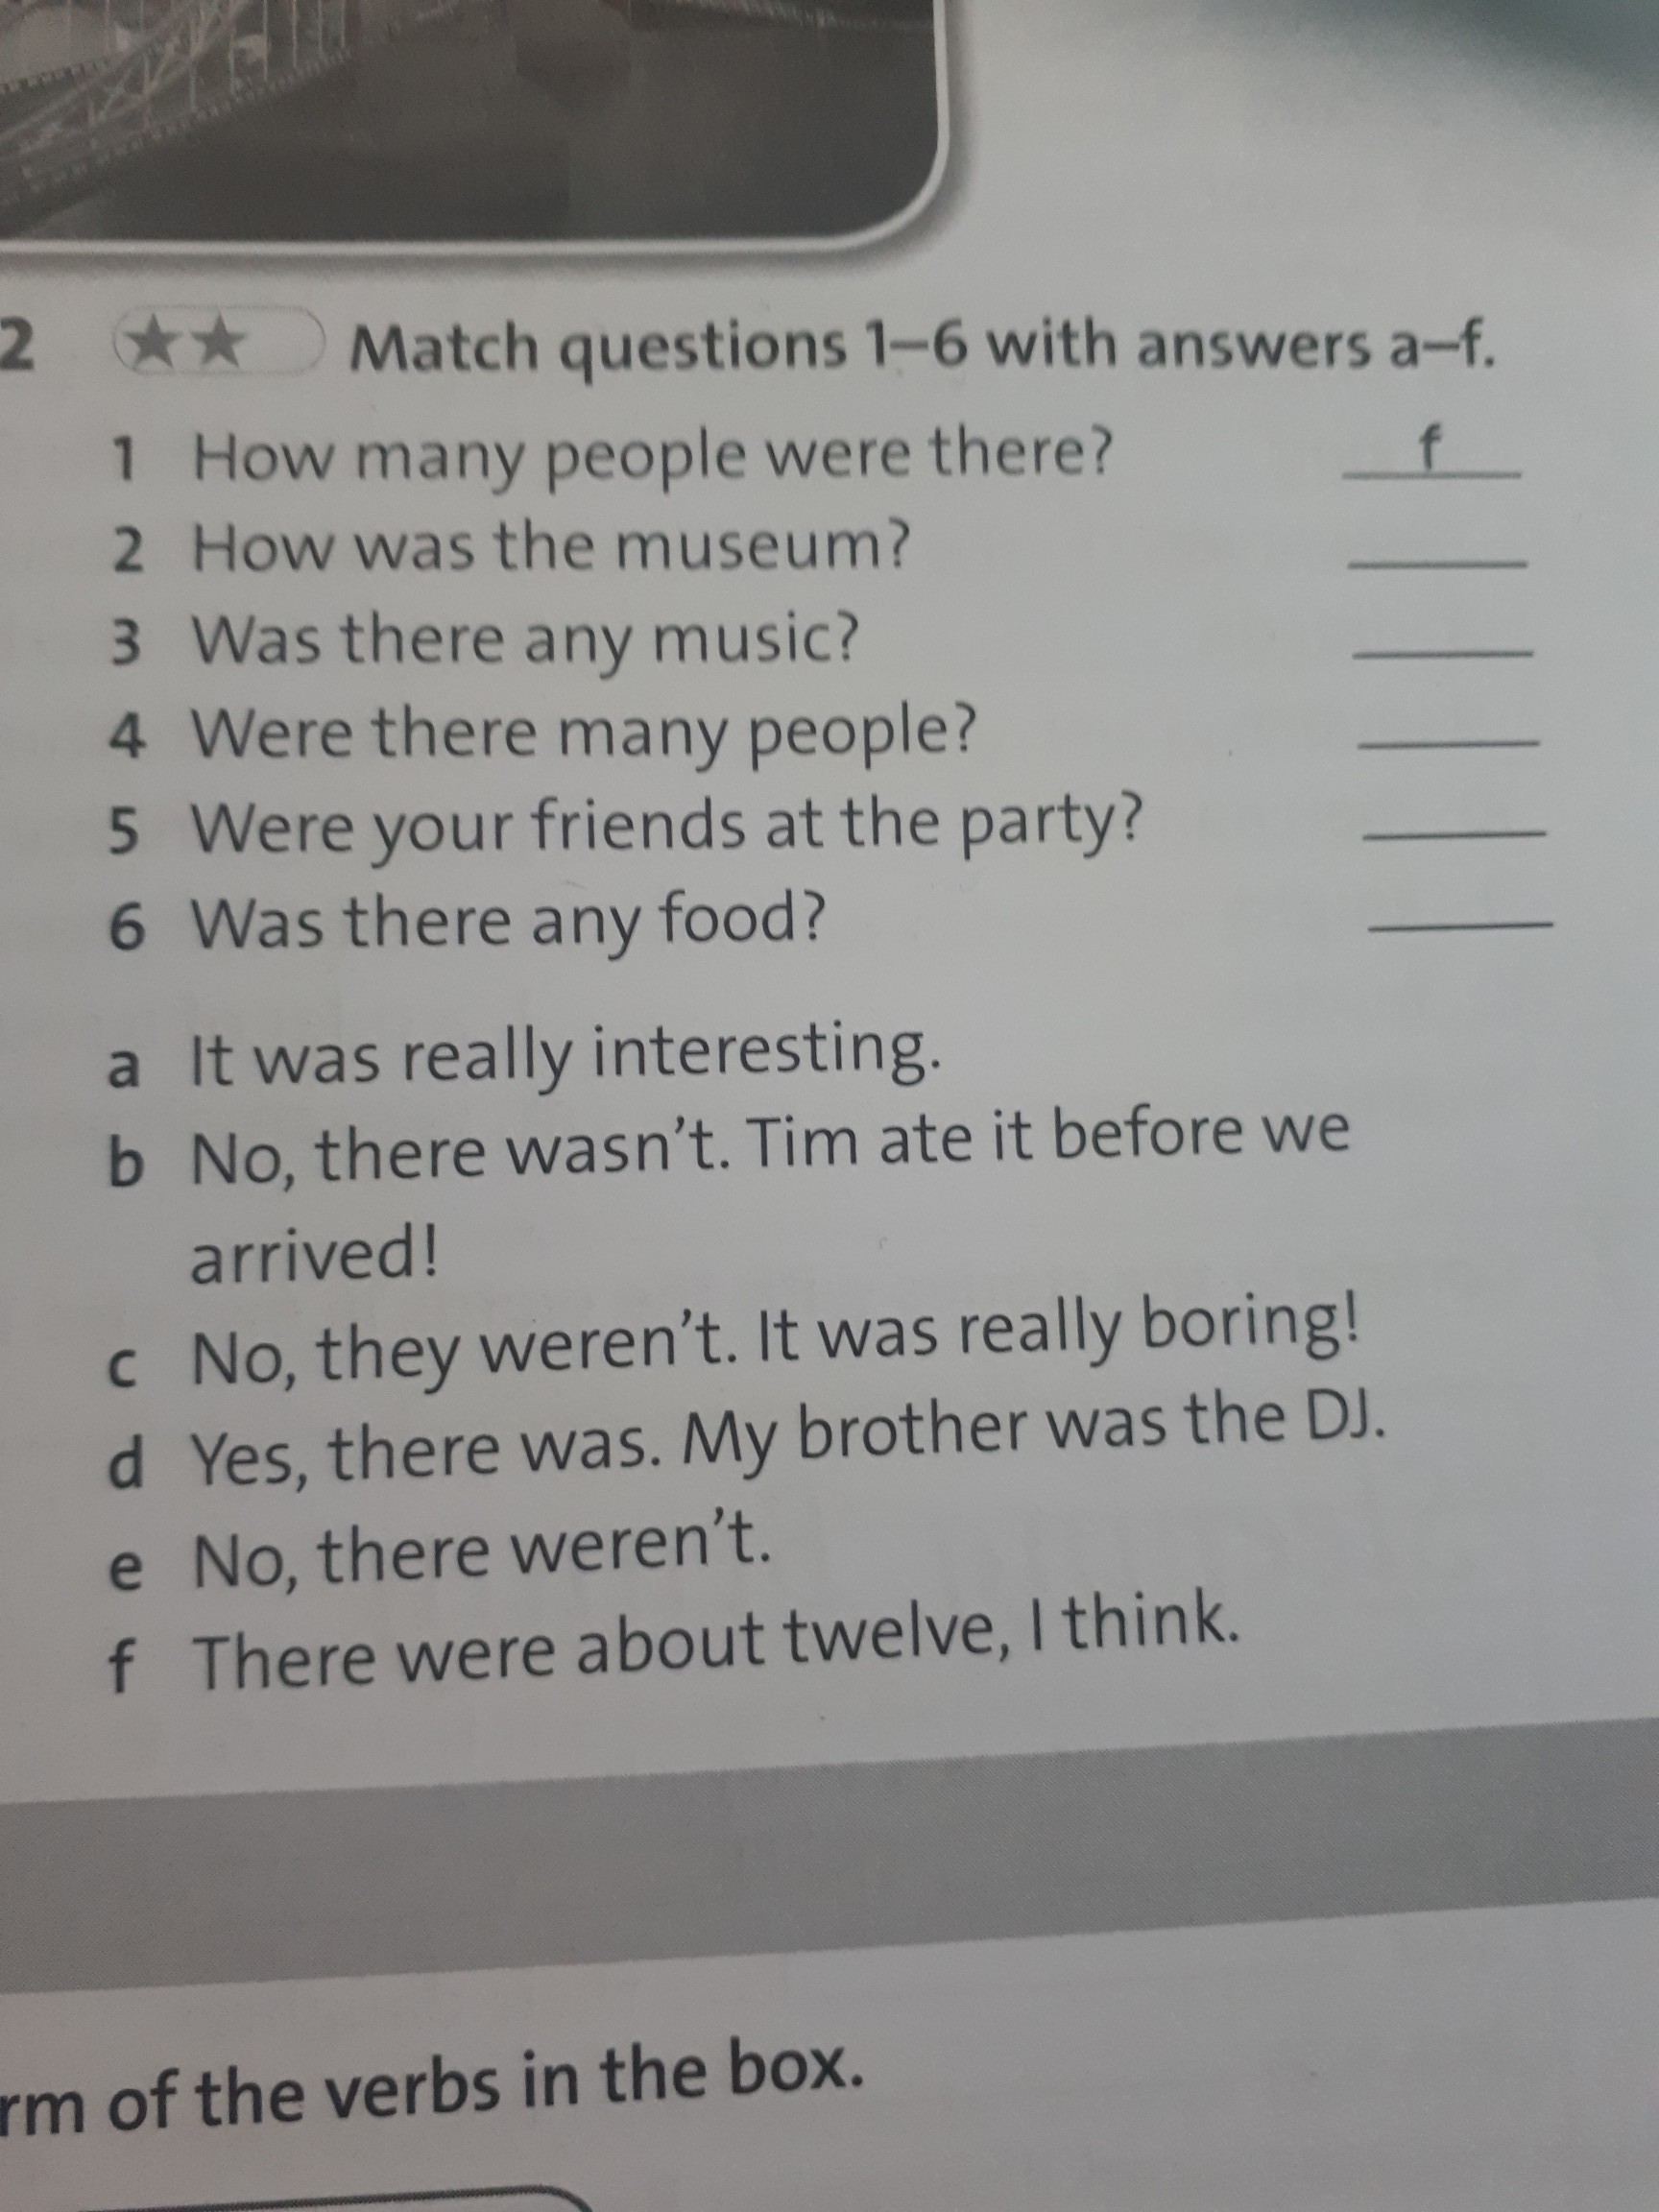 Match the questions with the texts